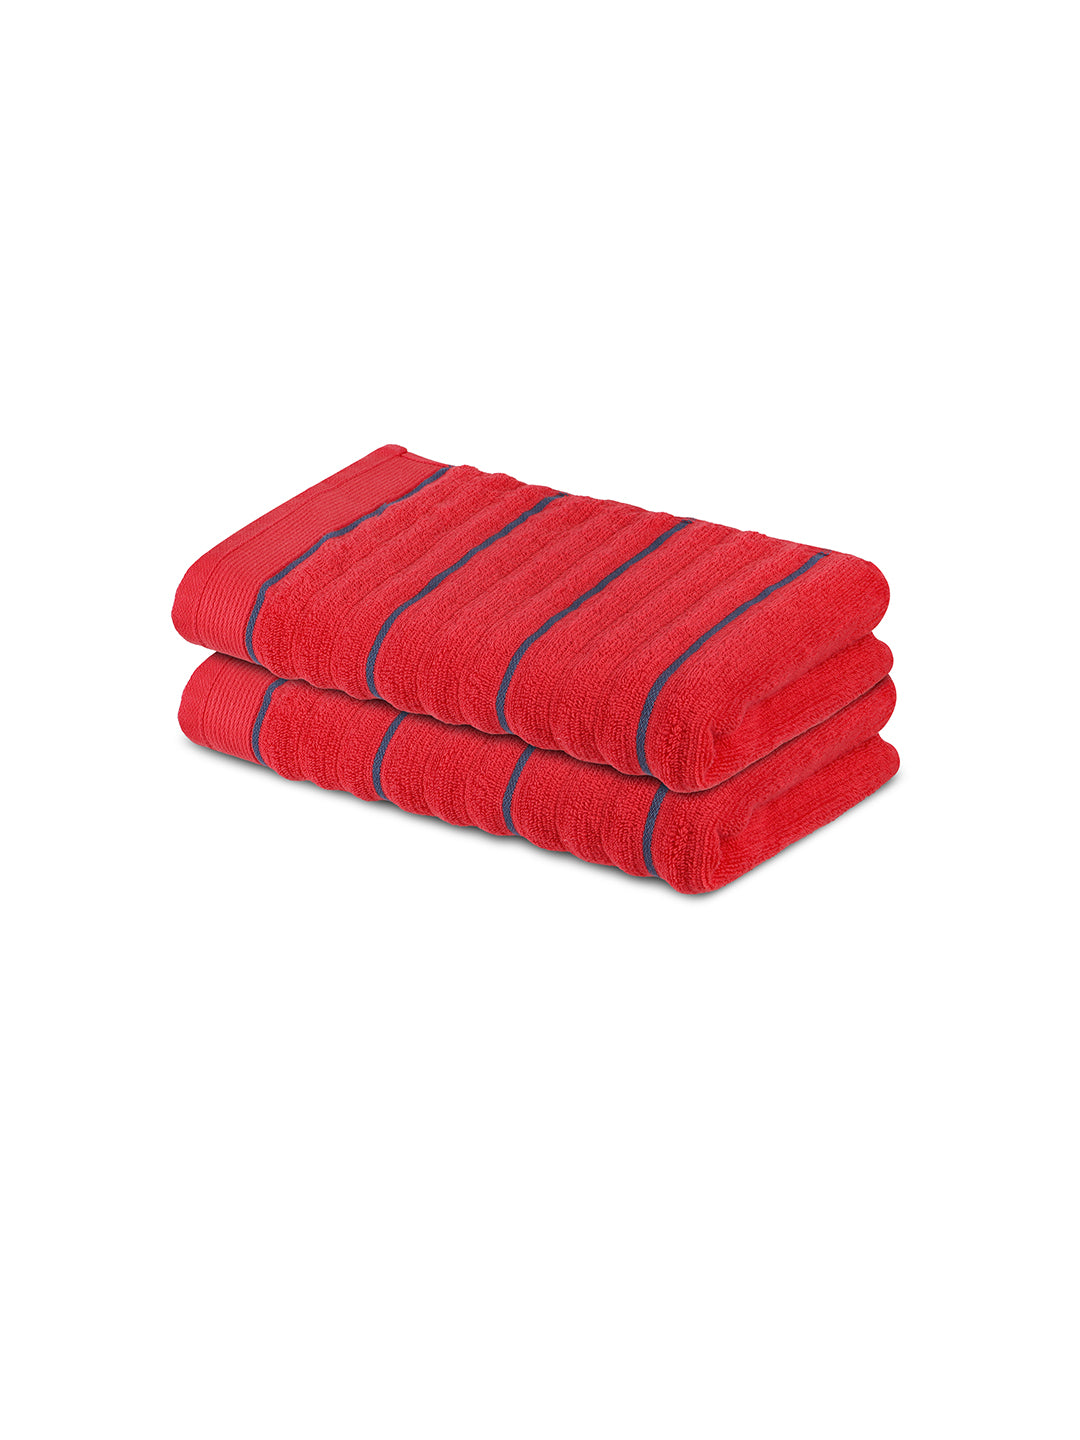 Elite Plush Quickdry Pack of 2 Hand Towels